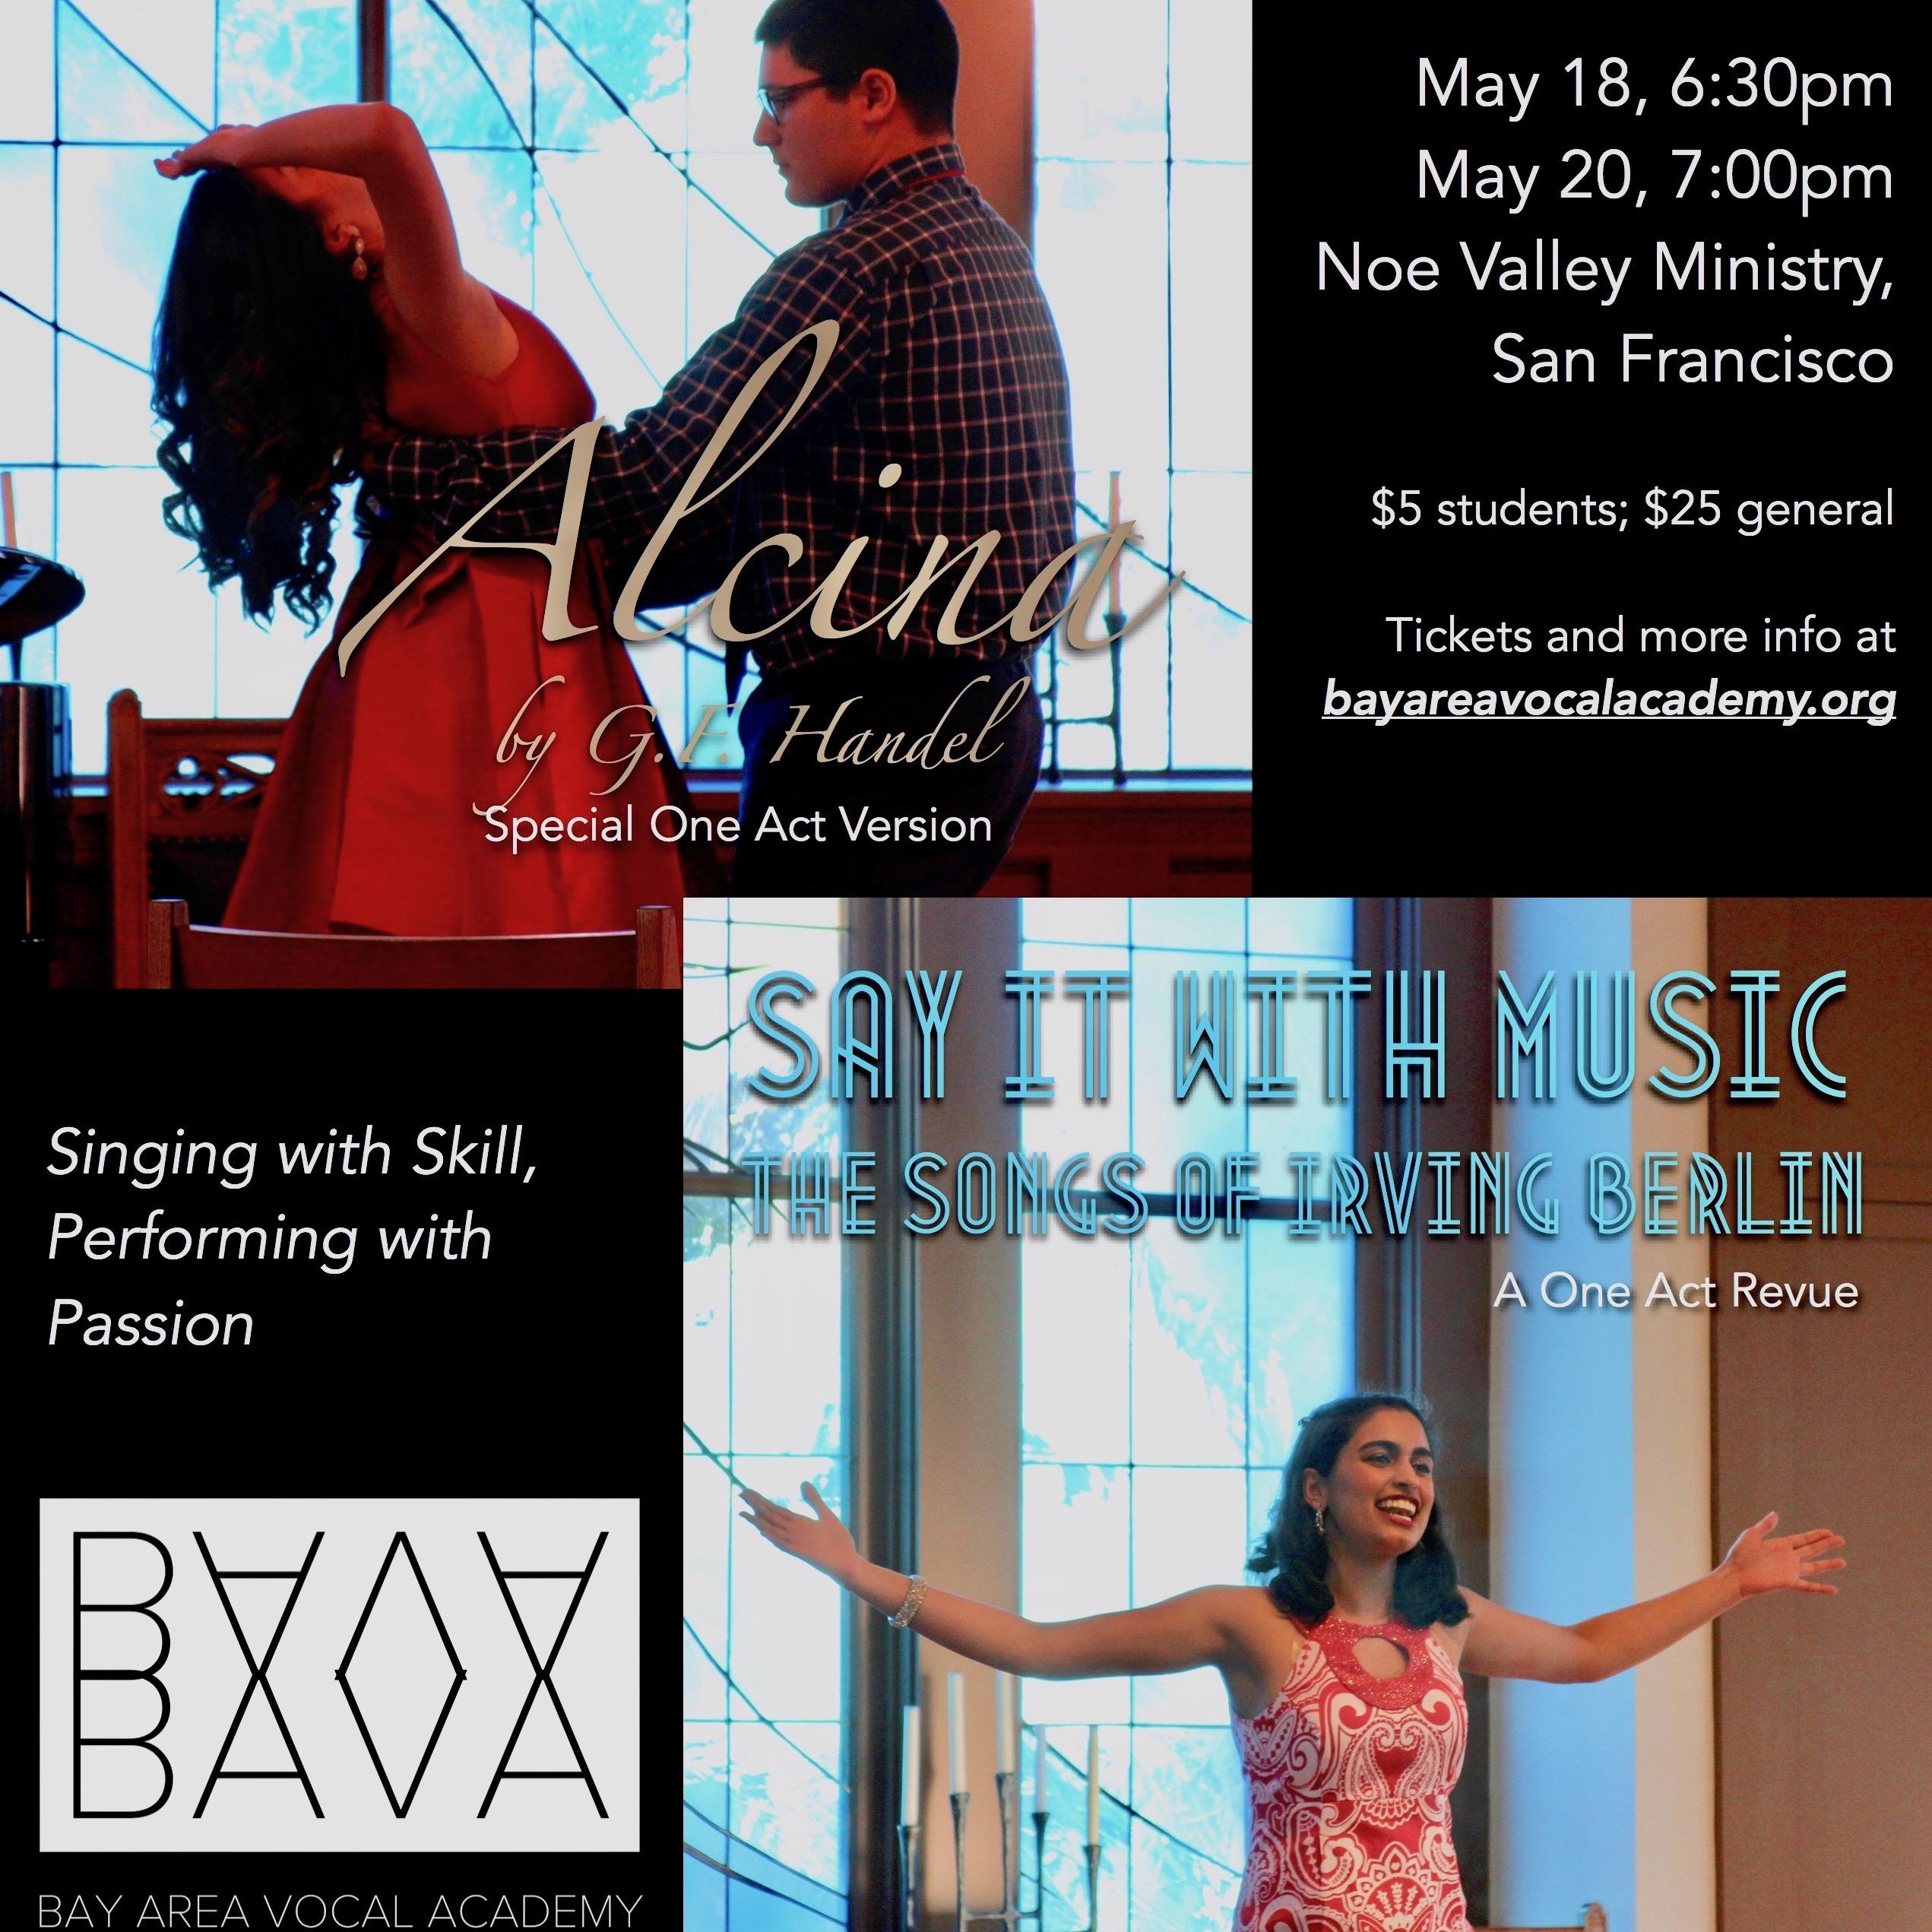 BAVA: Handel’s “Alcina” and “Say It with Music,” an Irving Berlin Revue